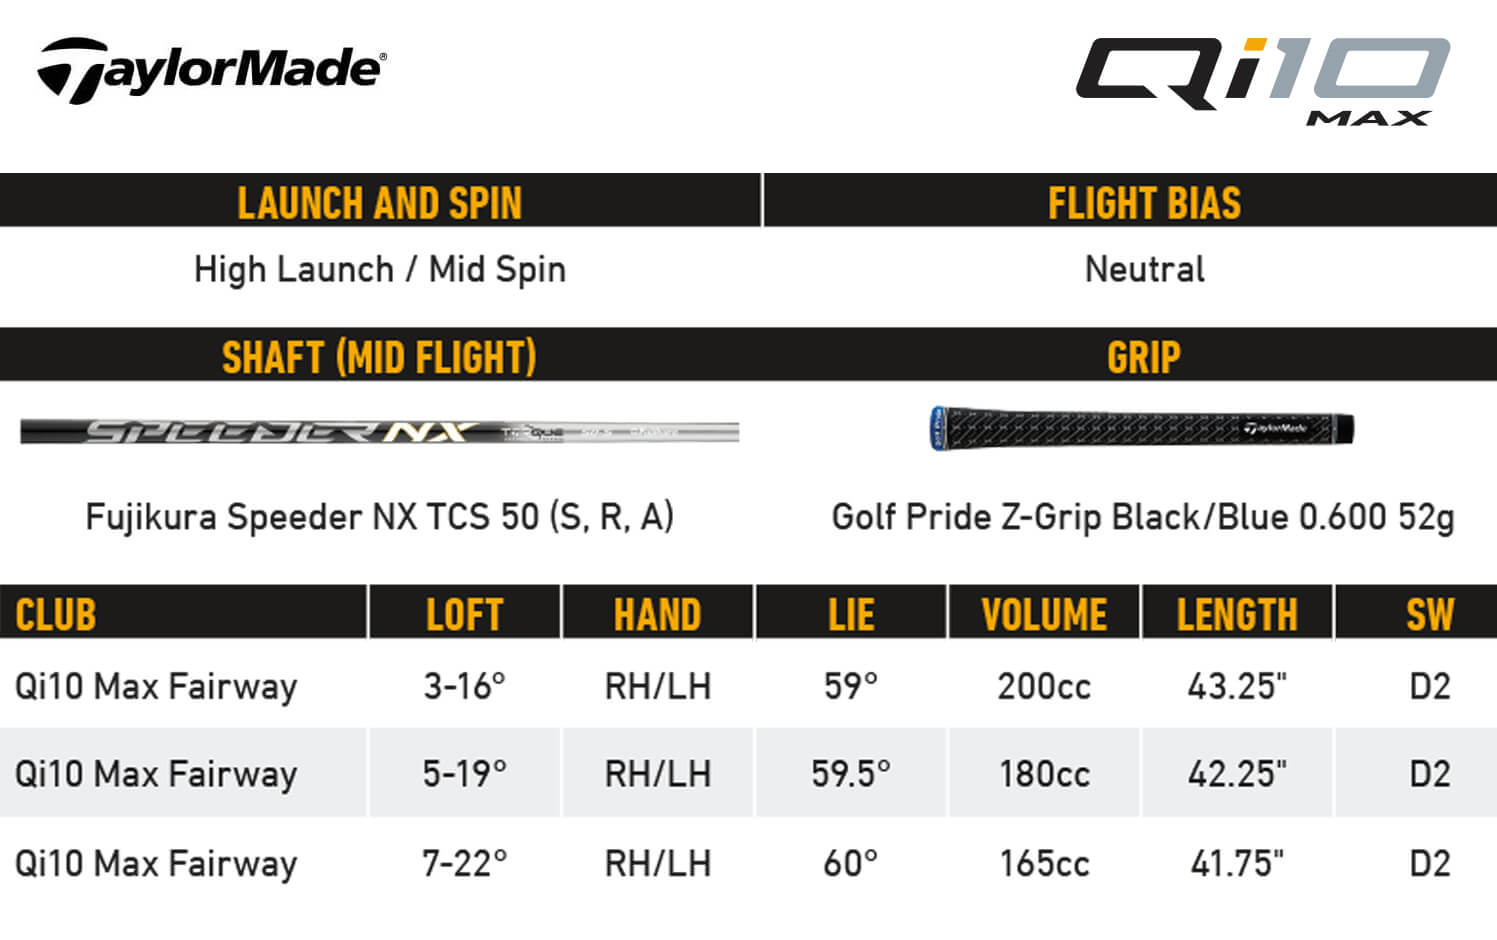 Specification for TaylorMade Qi10 Max Golf Fairway Woods